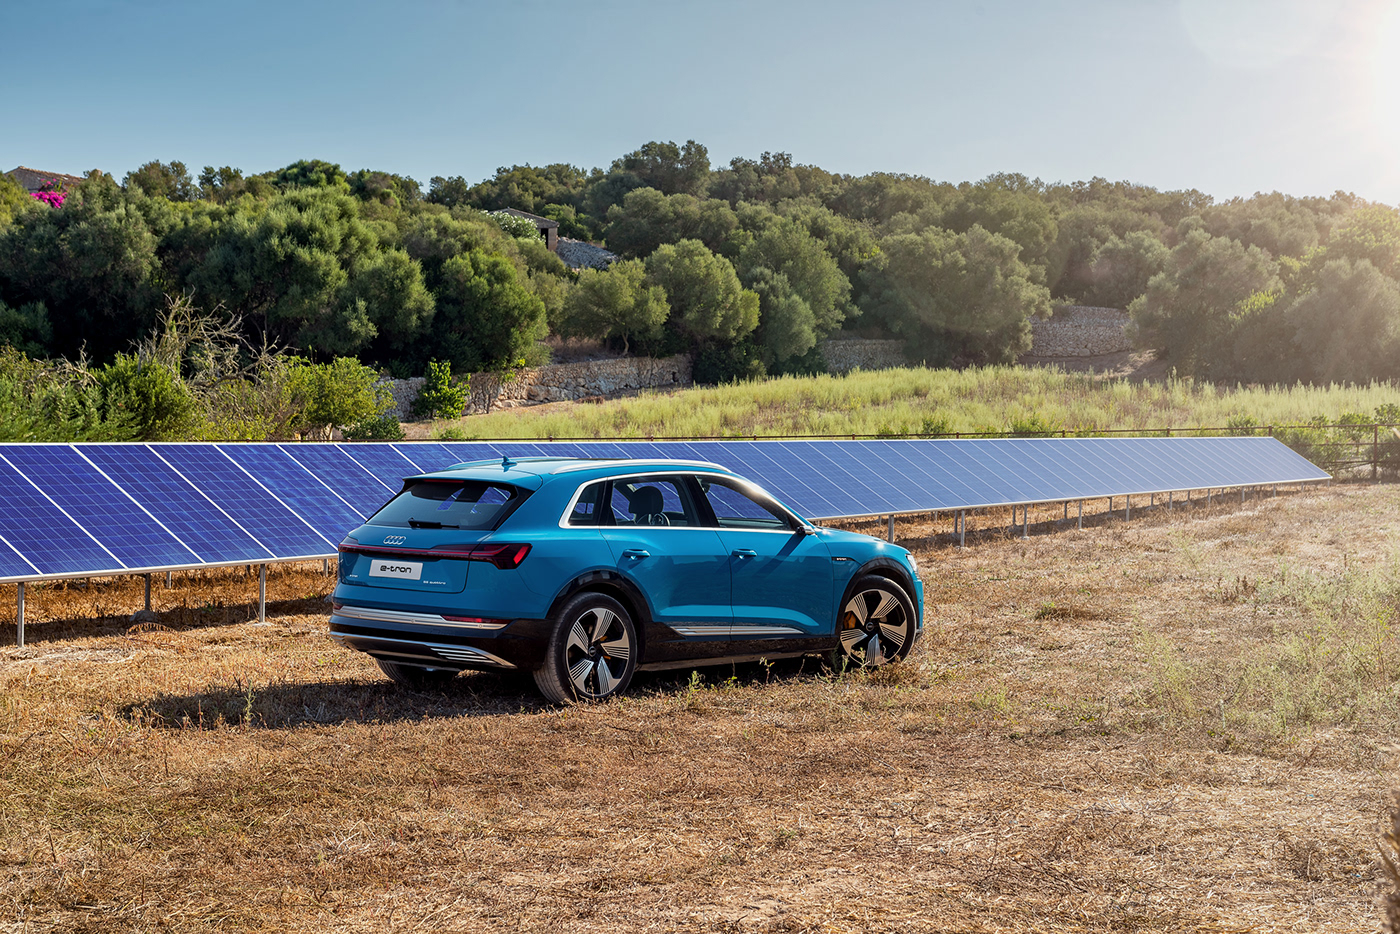 Audi e-tron back shot by Dean Wright Photography in Solar Farm. More on deanwrightautomotive.com